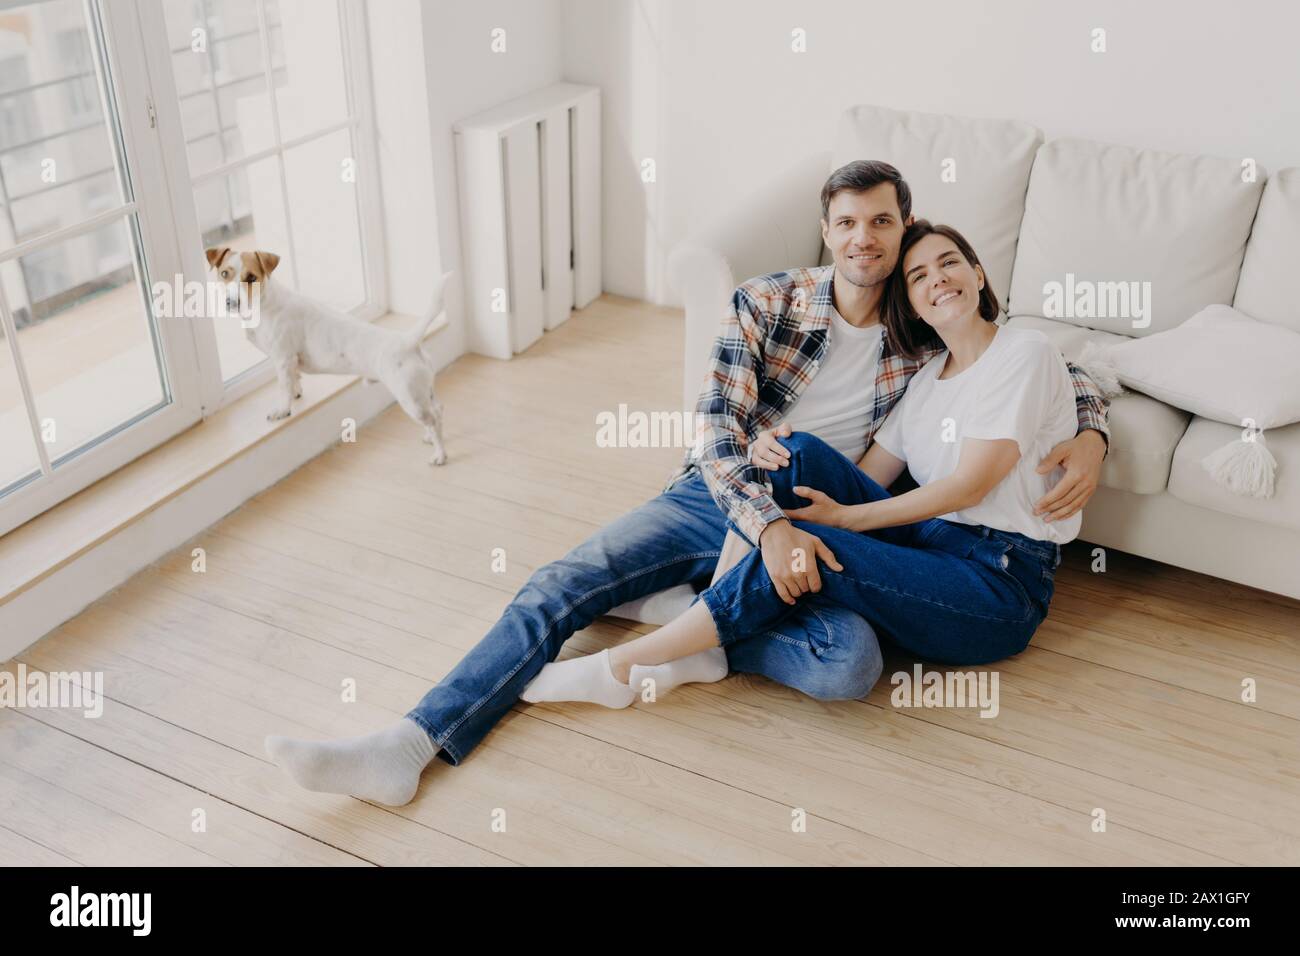 Romantic couple enjoy togetherness, embrace and feel support of each other, sit on floor near sofa, glad to spend free time together, dressed casually Stock Photo